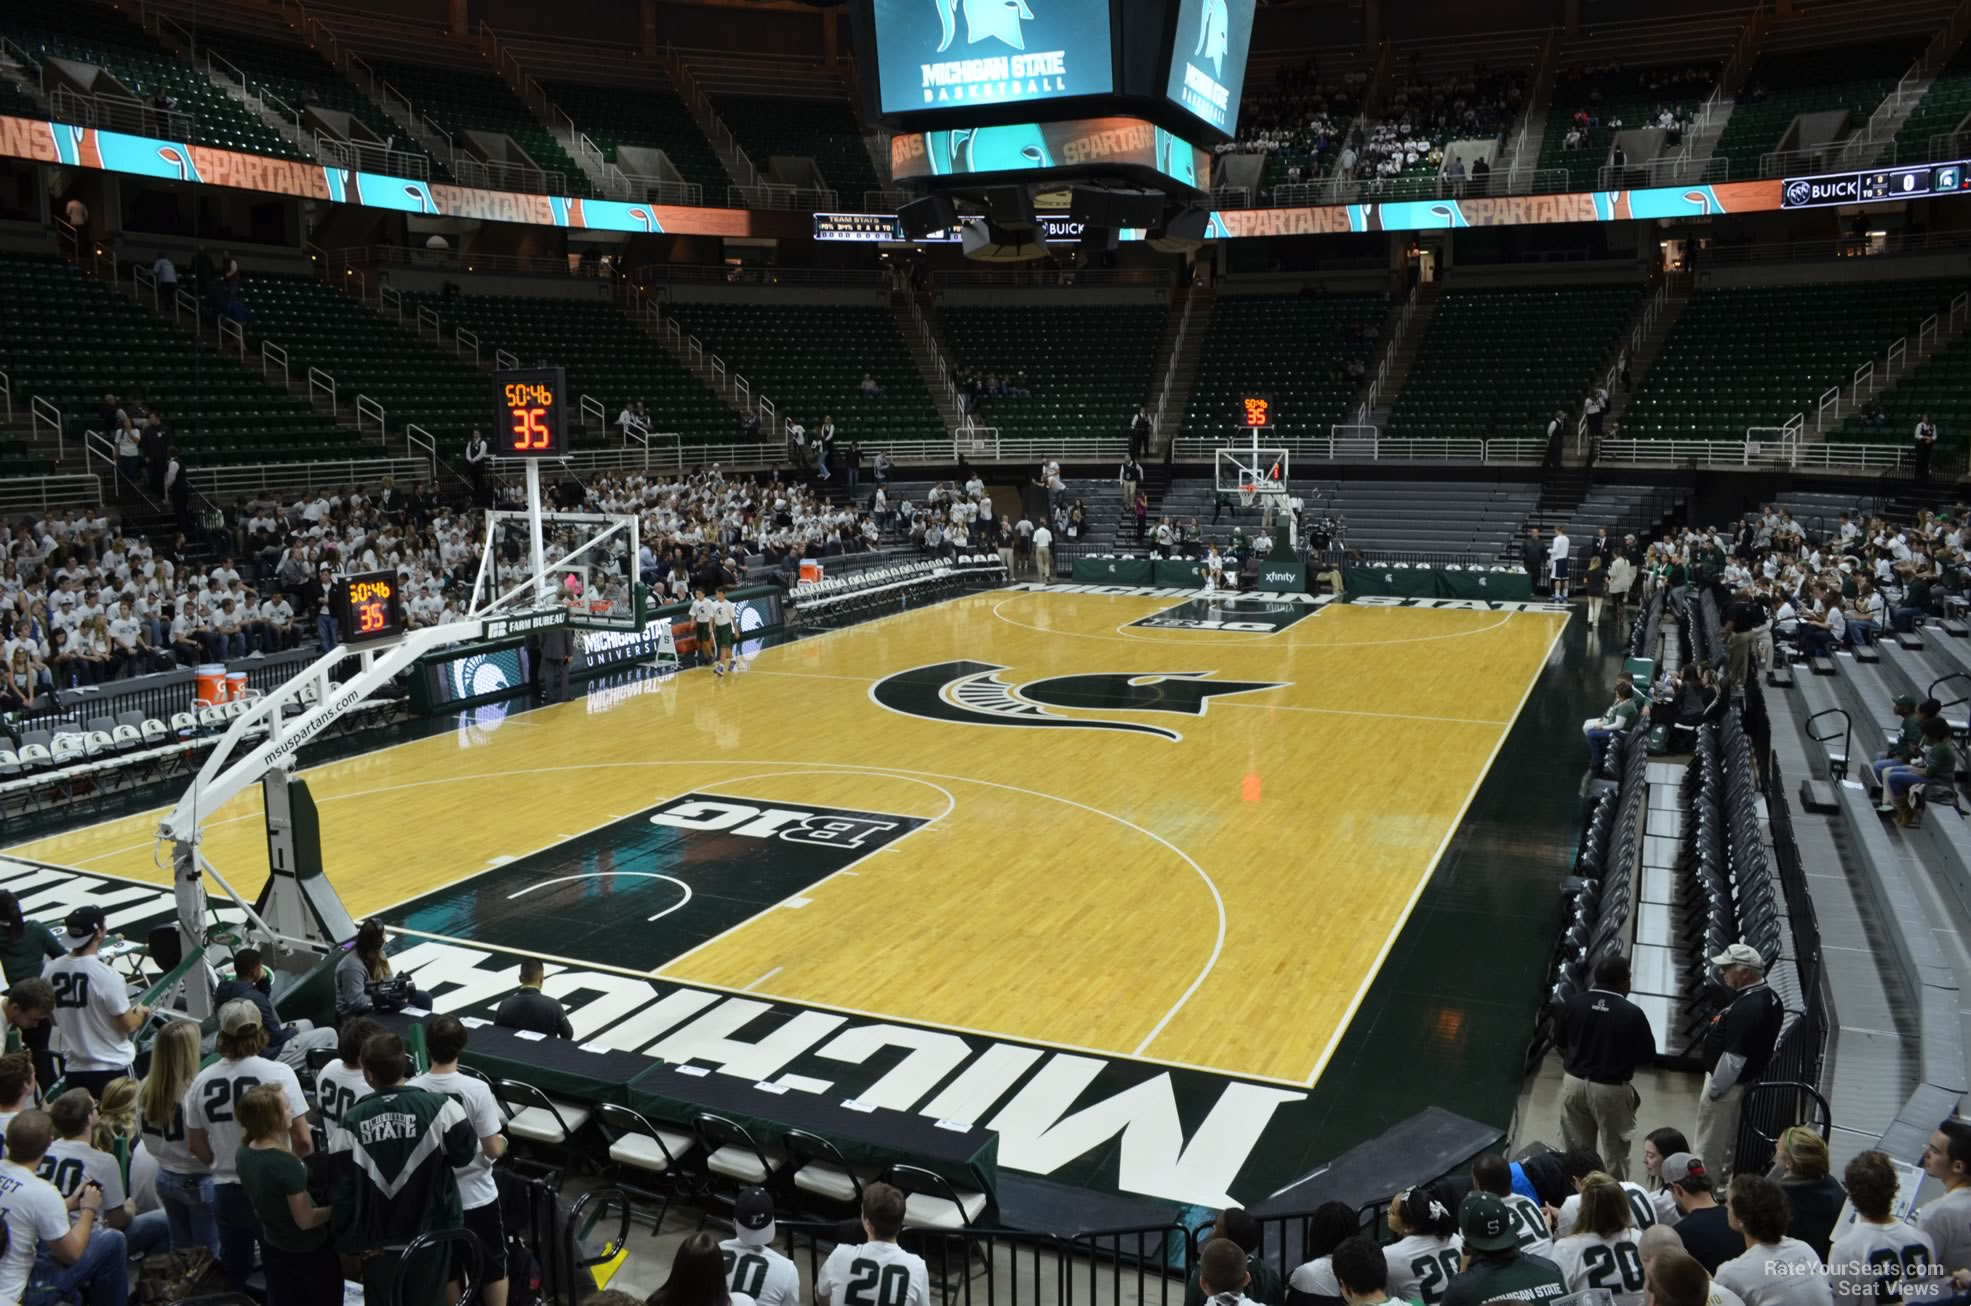 section 135, row 13 seat view  - breslin center